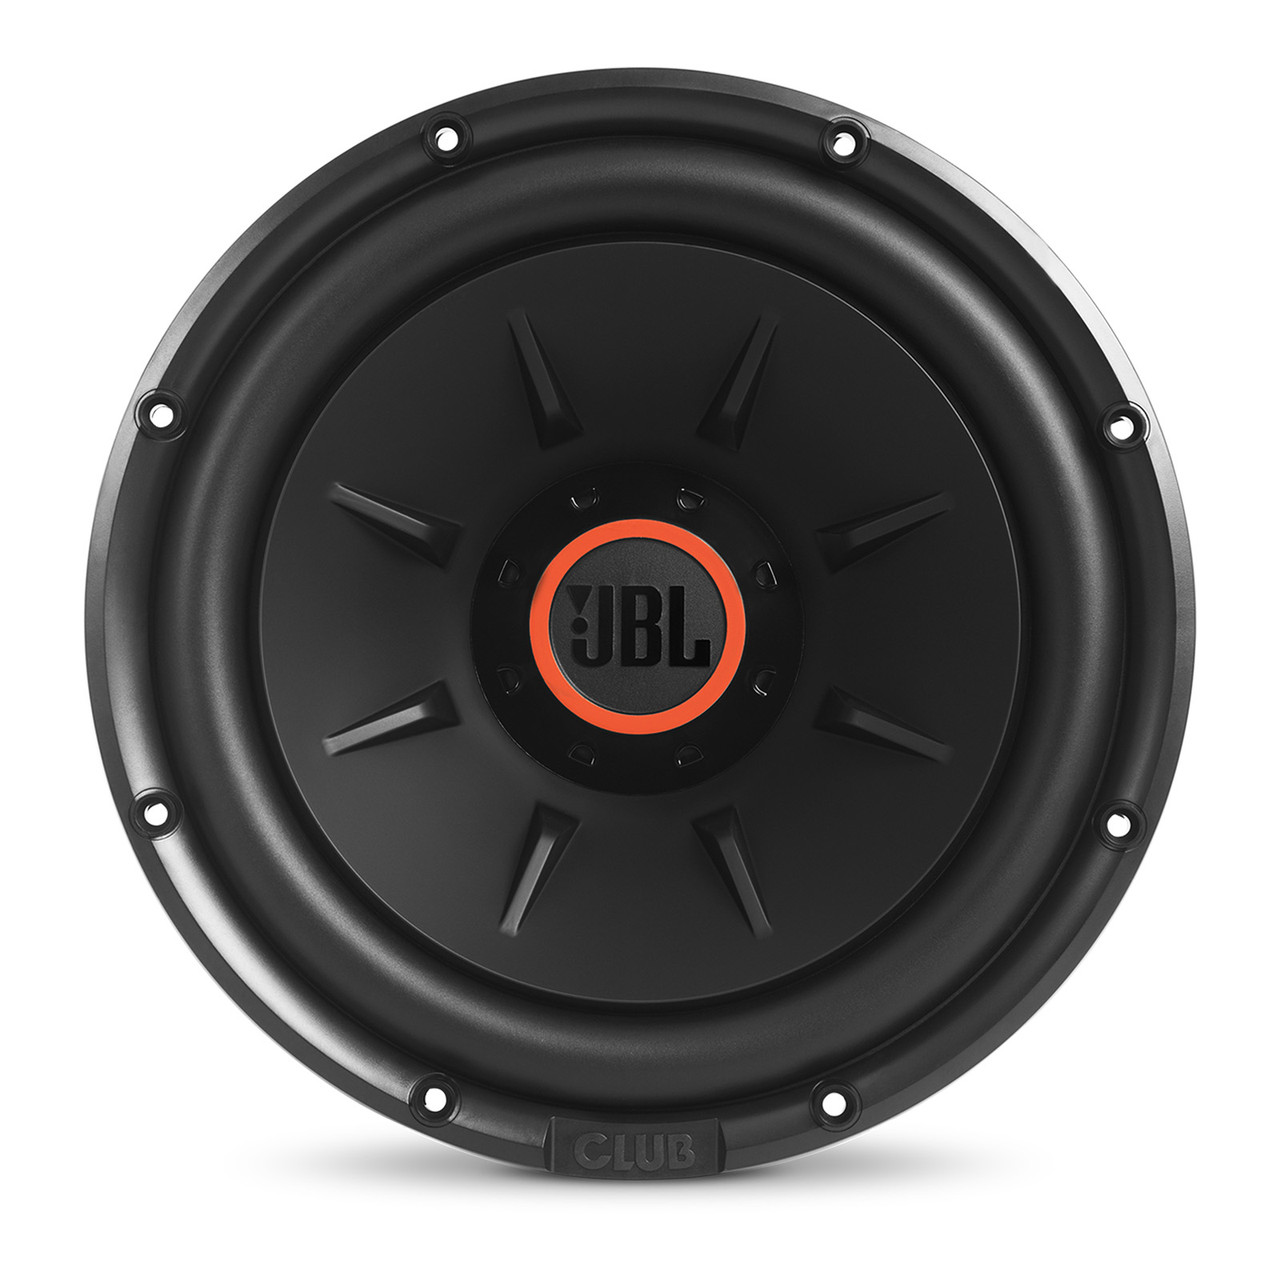 JBL Club 12" 1100 Watts Peaak Power Car Audio Subwoofer with Selectable Smart Impedance (2 or 4 Ohms) - Road